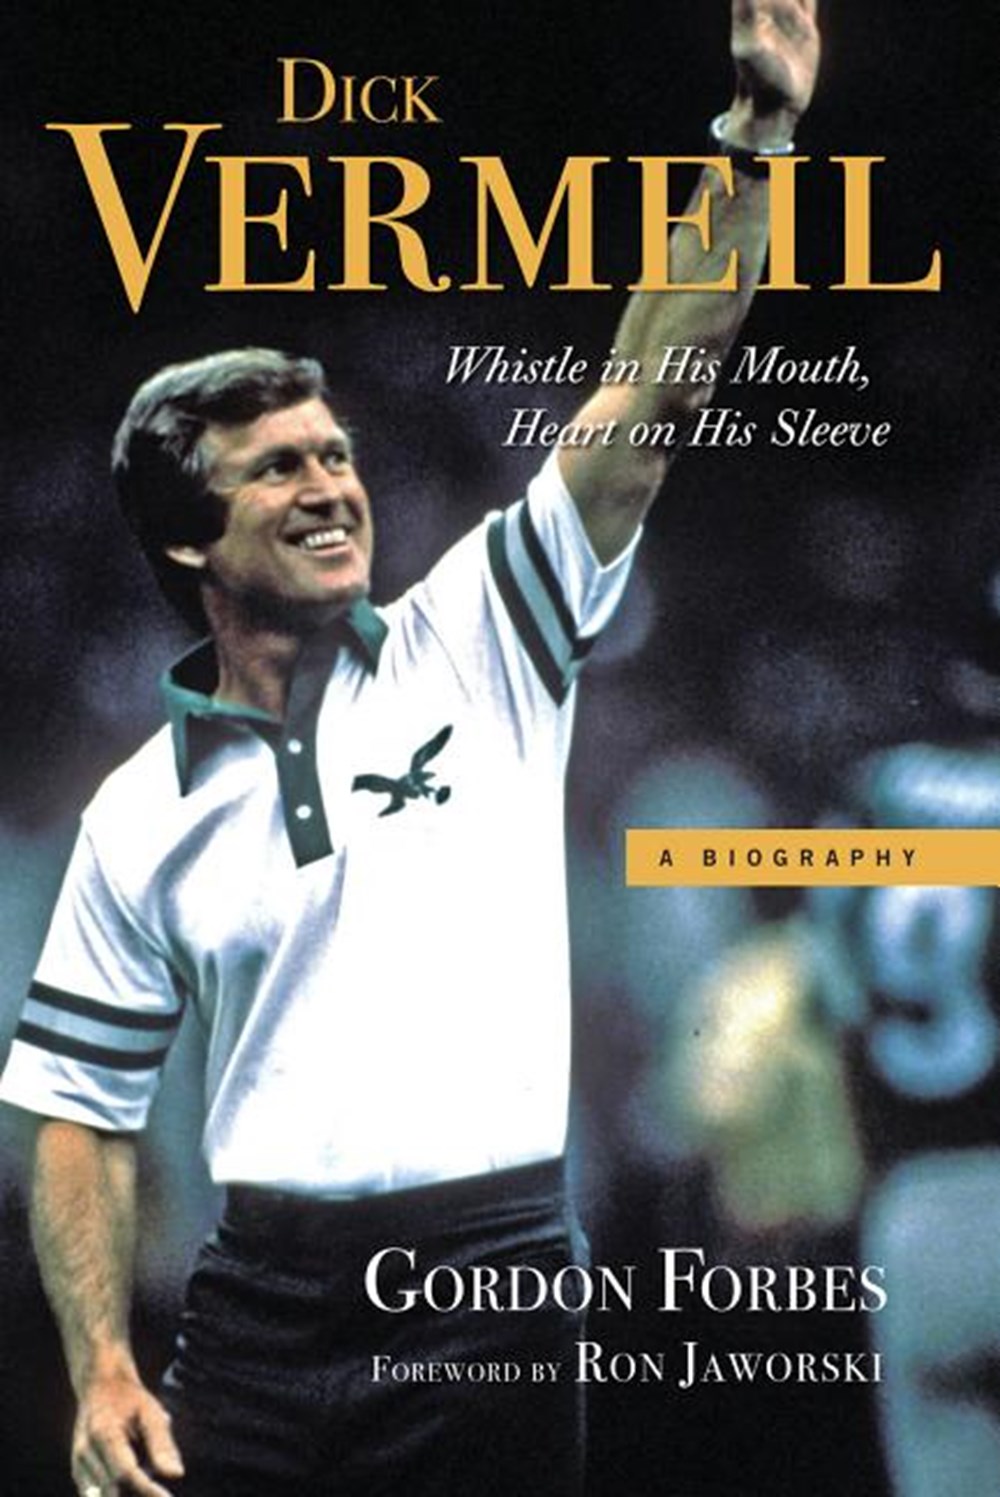 Dick Vermeil Whistle in His Mouth, Heart on His Sleeve